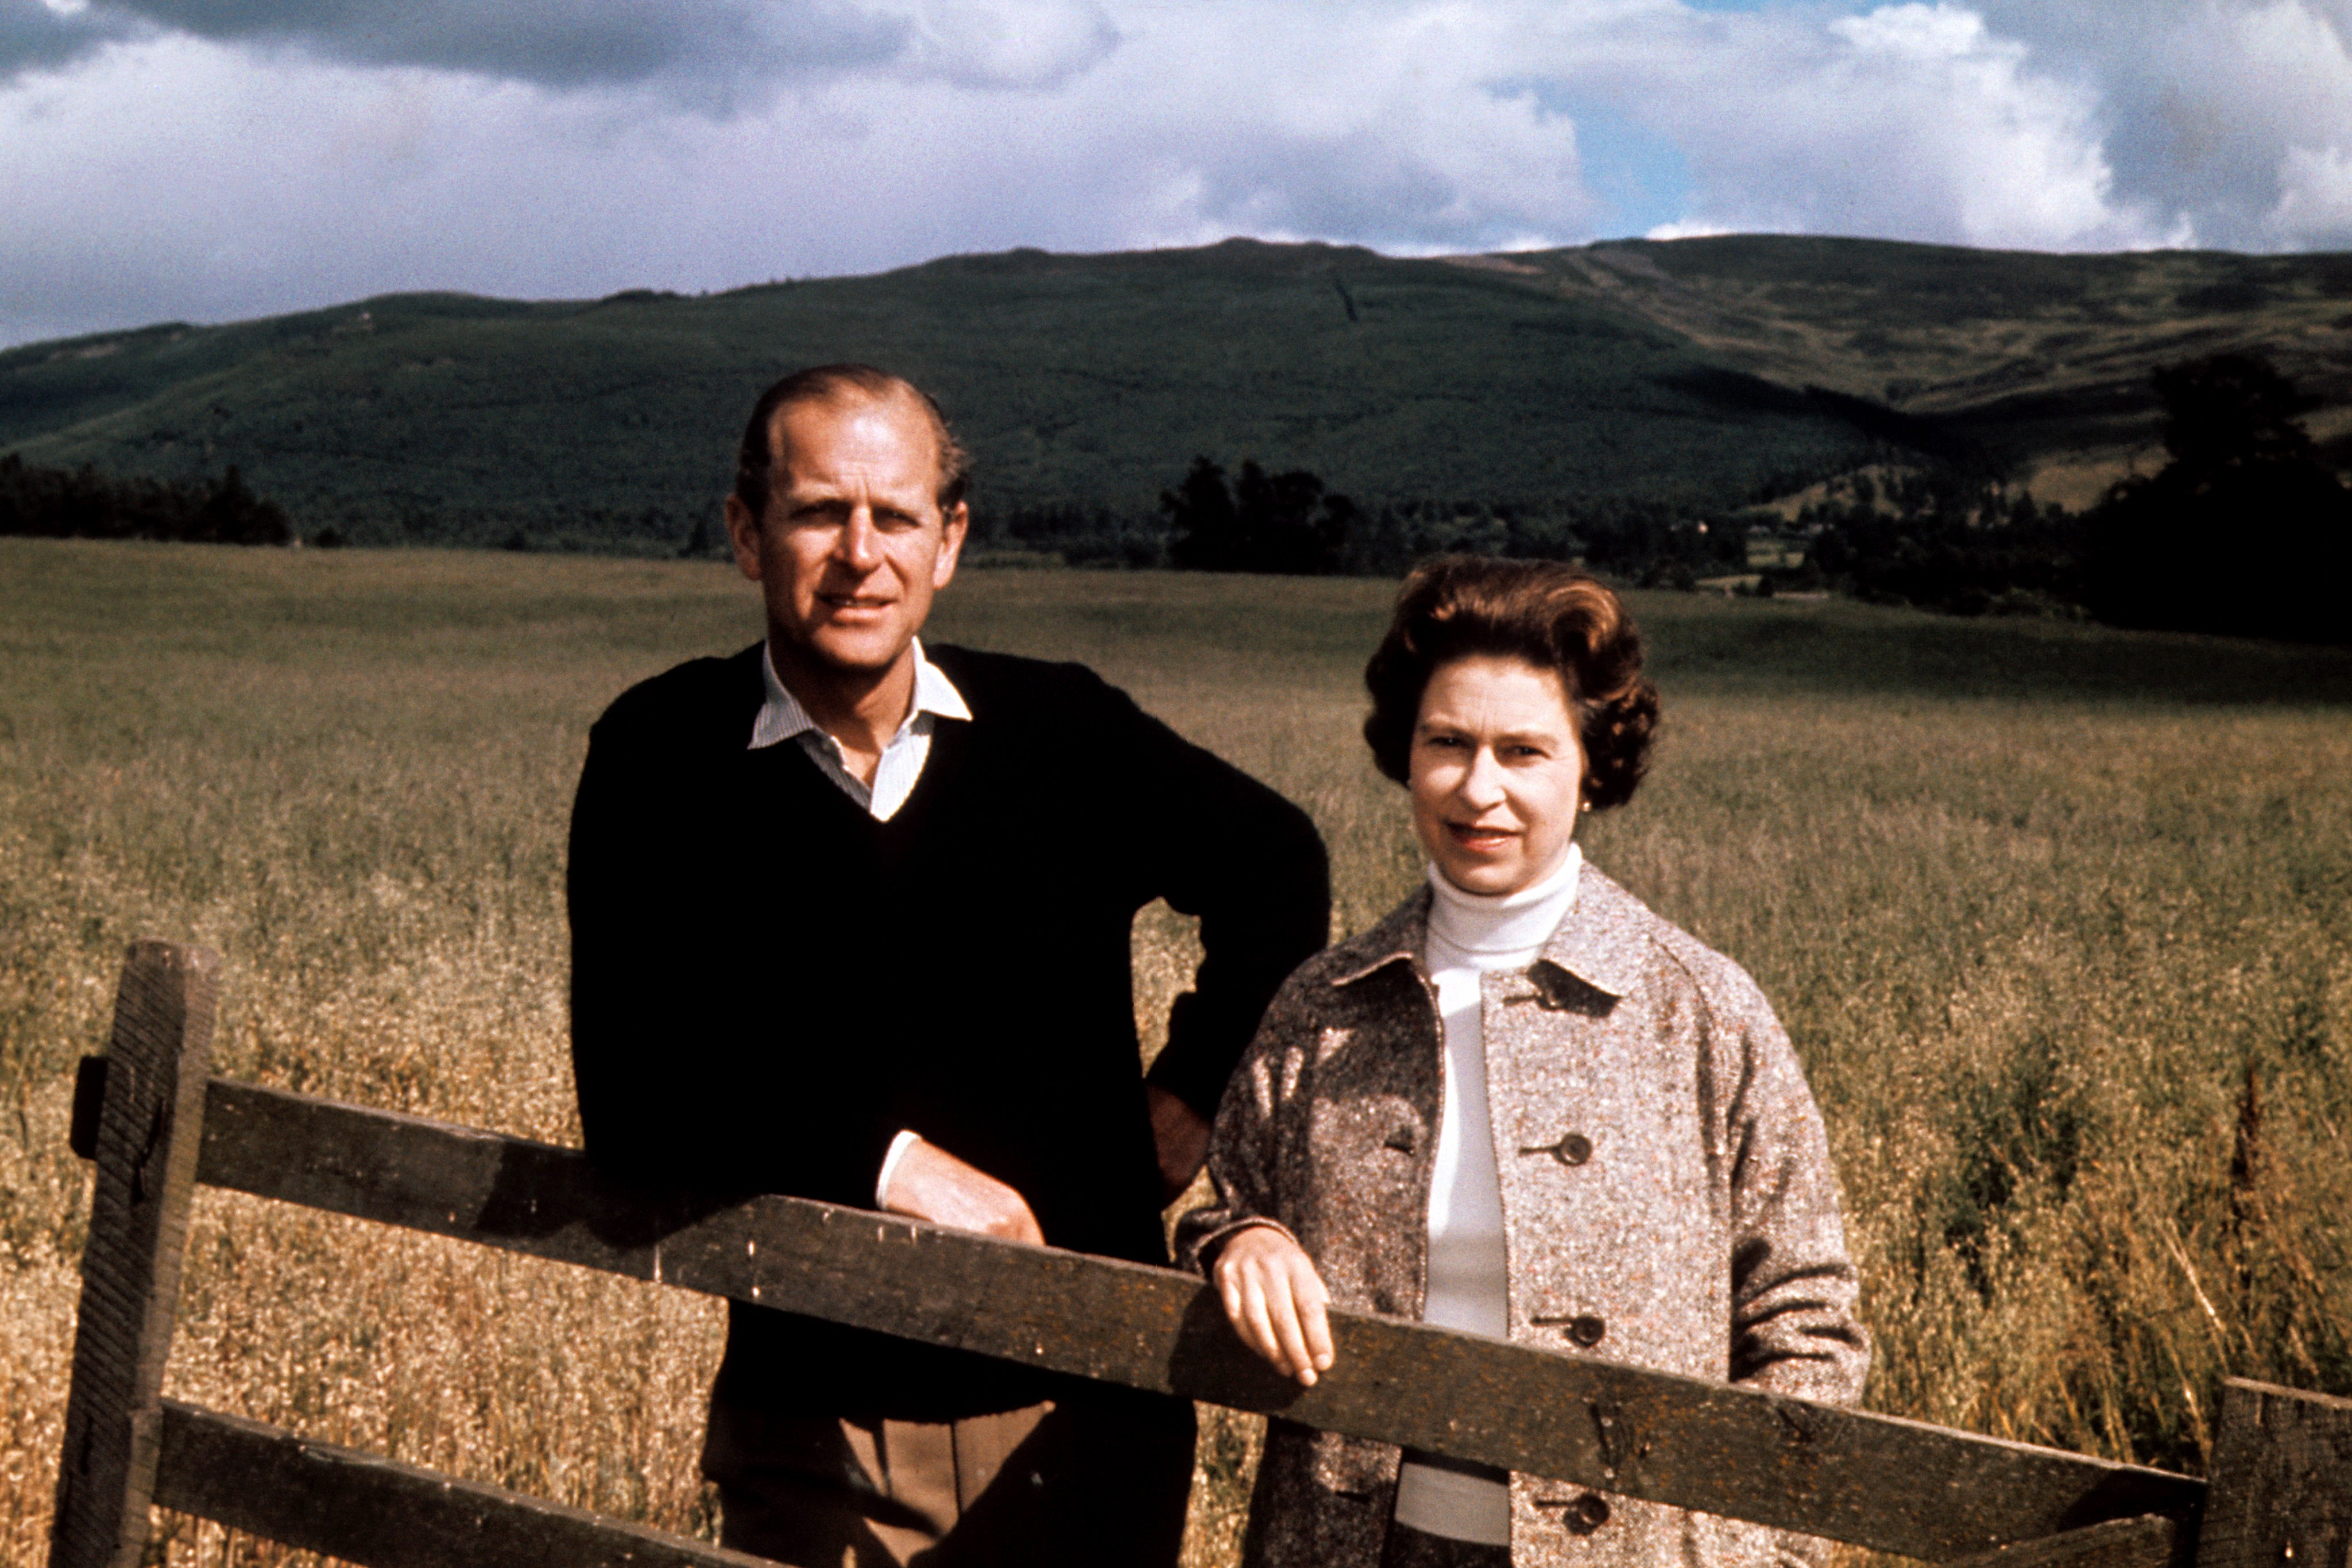 Queen Elizabeth II and the Duke of Edinburgh at Balmoral in 1972 to celebrate their Silver Wedding anniversary. Balmoral in the Highlands, one of the royals’ favourite places, held many memories for the Duke of Edinburgh. The Queen was once said to never be happier than when she was at Balmoral, Philip, too, loved the outdoor life that was synonymous with their annual break, which stretched from the end of July into October.